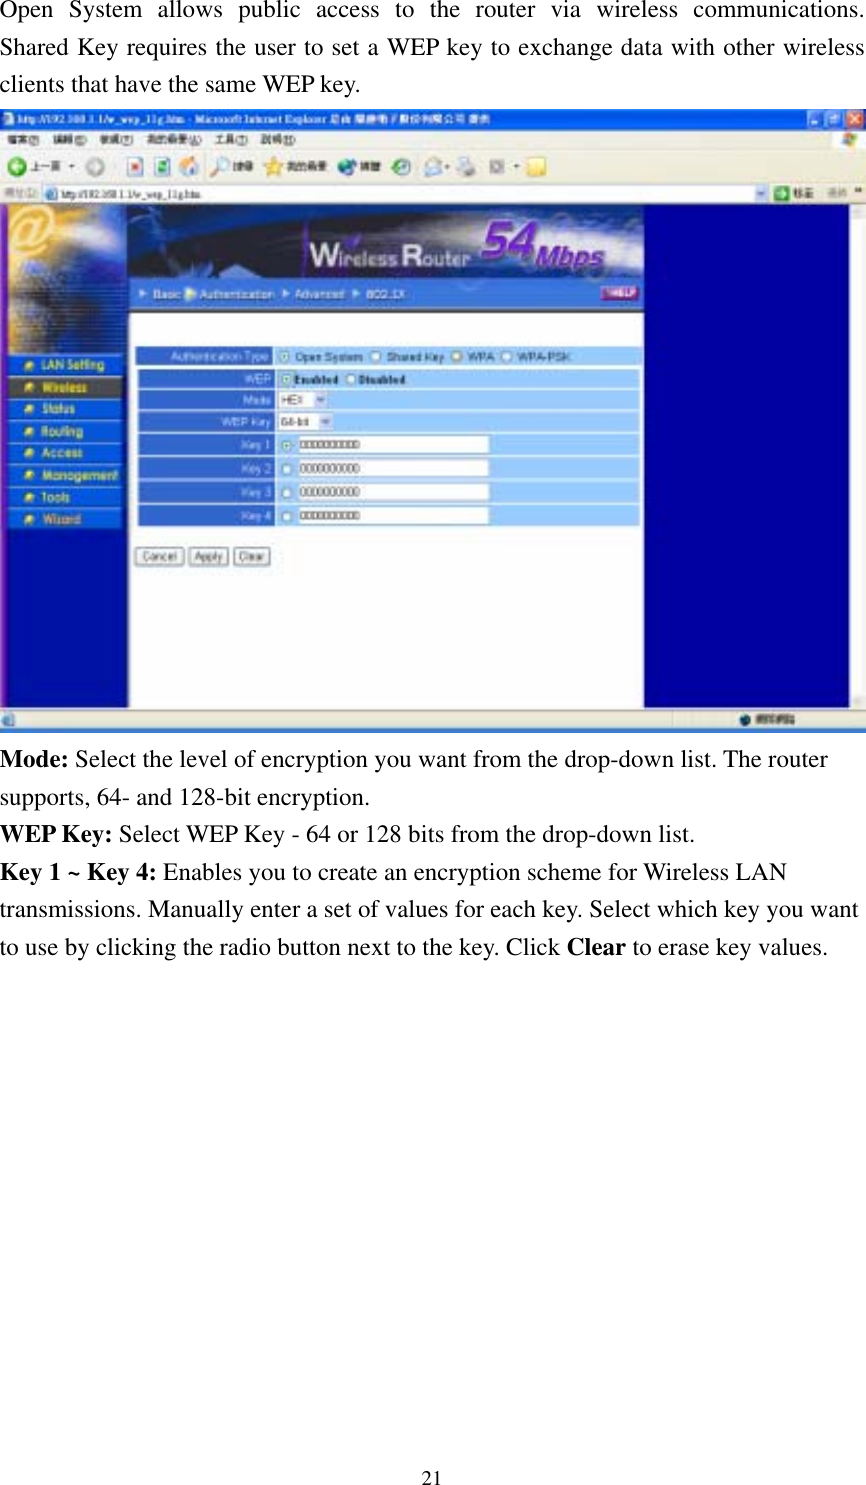  21Open System allows public access to the router via wireless communications.  Shared Key requires the user to set a WEP key to exchange data with other wireless clients that have the same WEP key.  Mode: Select the level of encryption you want from the drop-down list. The router supports, 64- and 128-bit encryption. WEP Key: Select WEP Key - 64 or 128 bits from the drop-down list. Key 1 ~ Key 4: Enables you to create an encryption scheme for Wireless LAN transmissions. Manually enter a set of values for each key. Select which key you want to use by clicking the radio button next to the key. Click Clear to erase key values.  